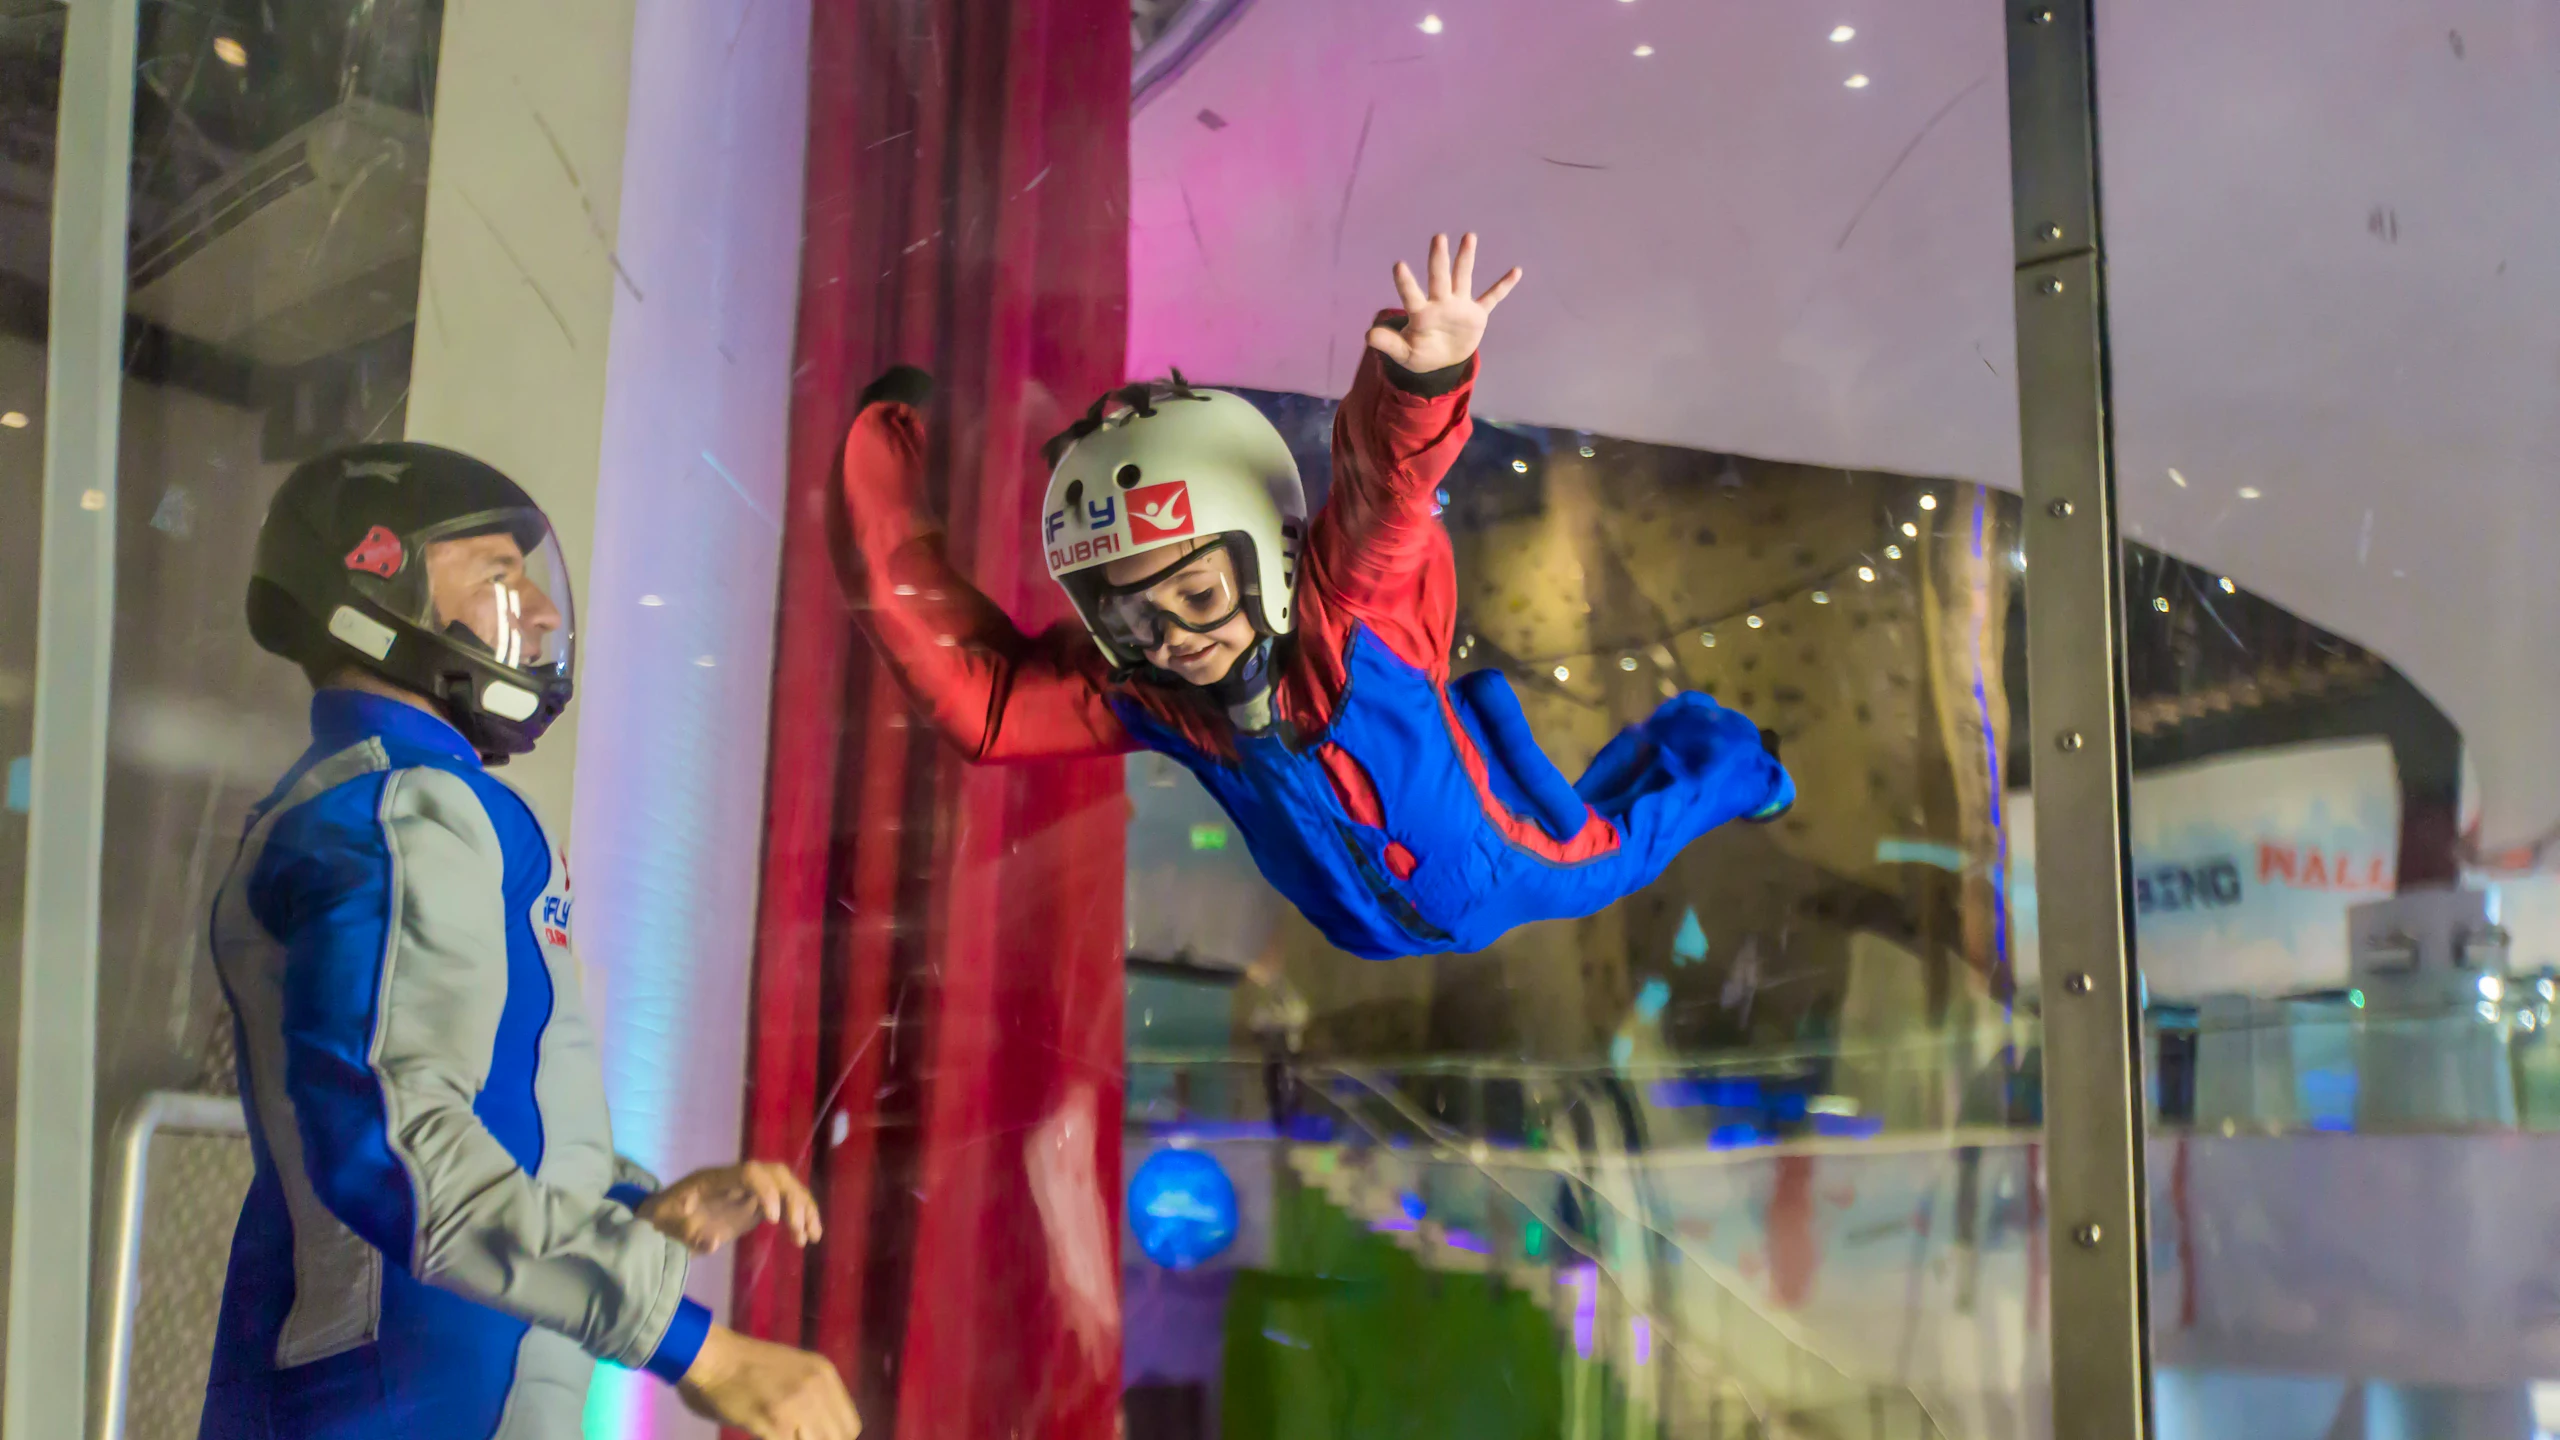 iFly Dubai - Indoor Skydiving Experience